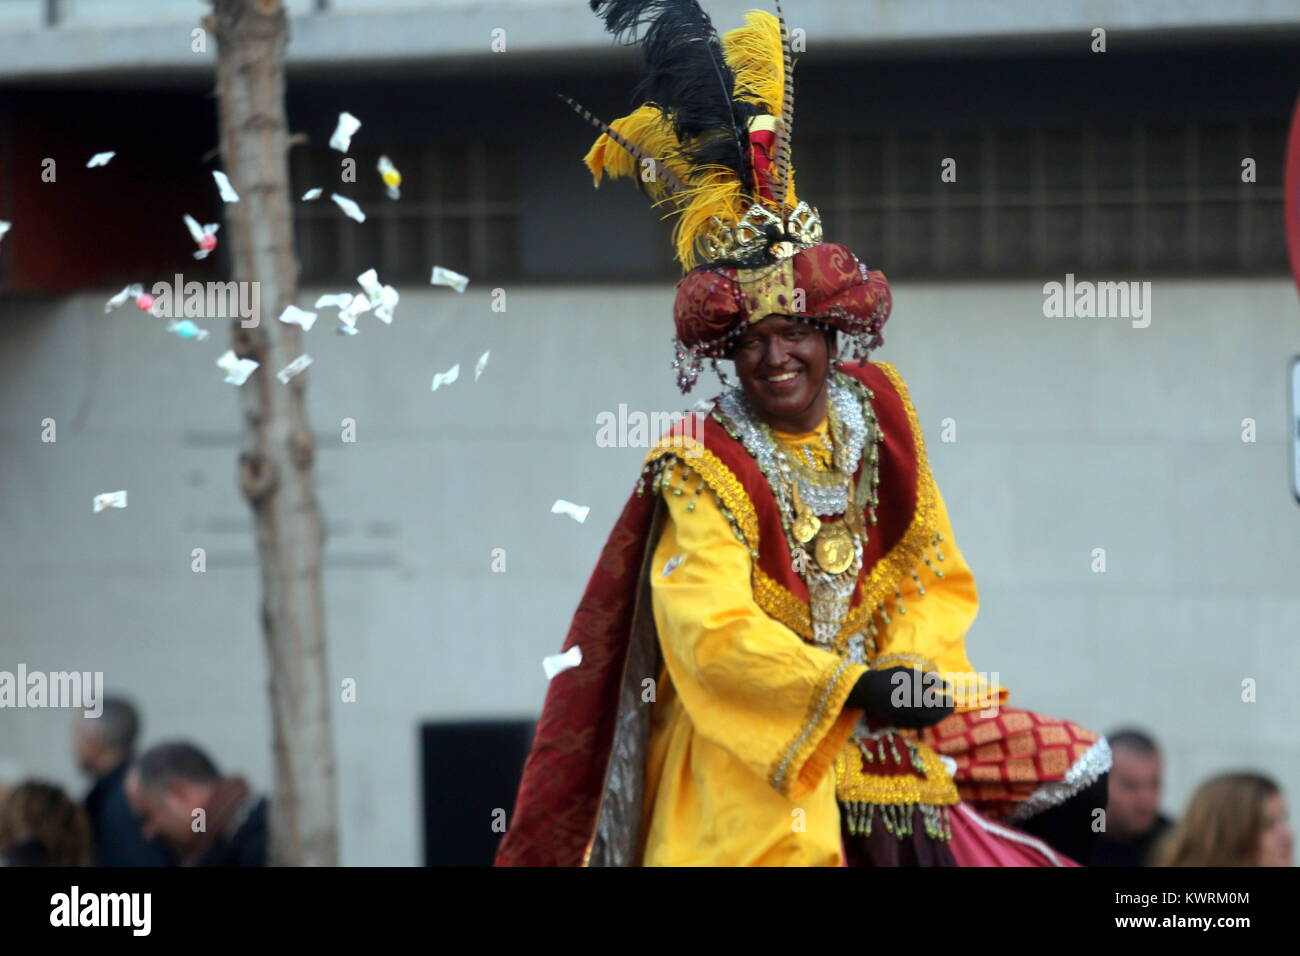 January 4, 2018 - January 4, 2017 has been celebrated in the neighborhood of Cruz de Humilladero (Malaga) the traditional procession of Three Wise Men who arrived in helipcotero, then greeted the children and then continued their way in Camel through the streets of Malaga delivering stuffed animals and candies Credit: Fotos Lorenzo Carnero/ZUMA Wire/Alamy Live News Stock Photo